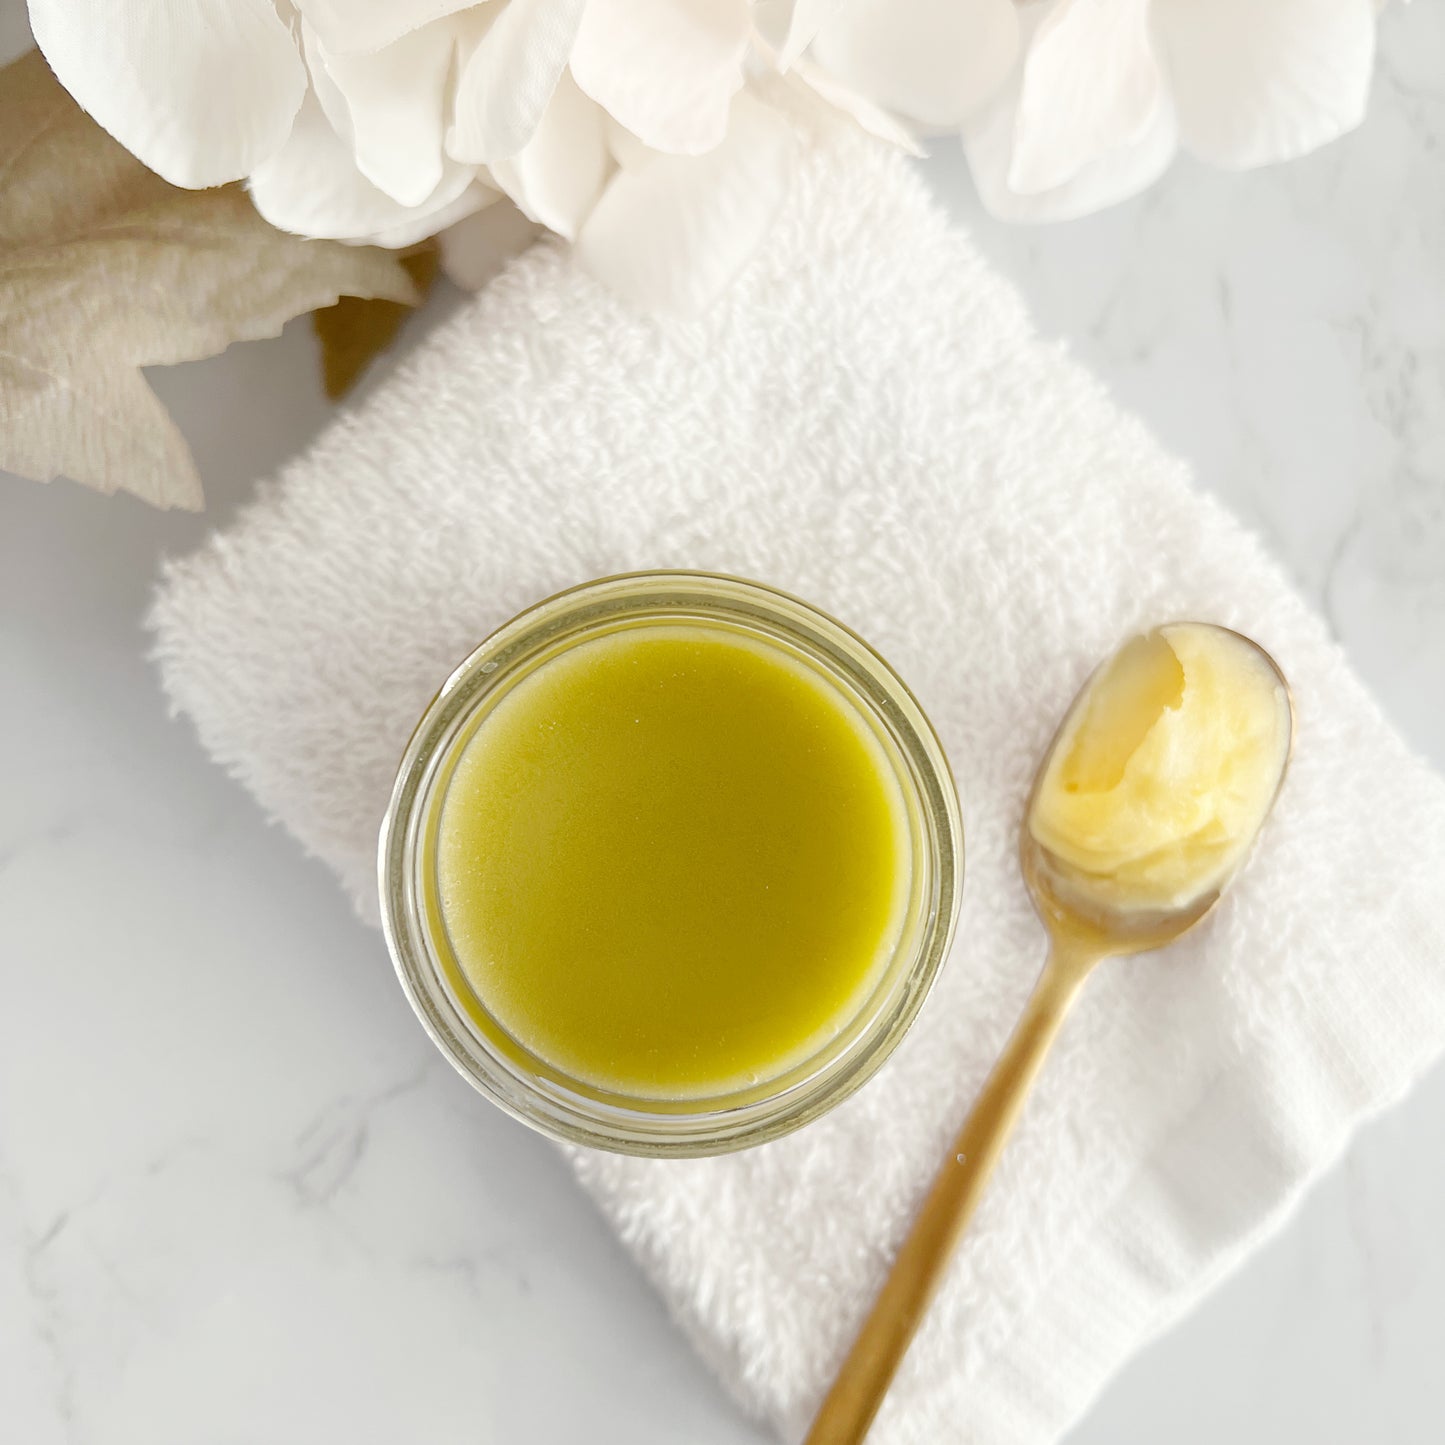 Cleansing balm made by Lather and Soul Skincare